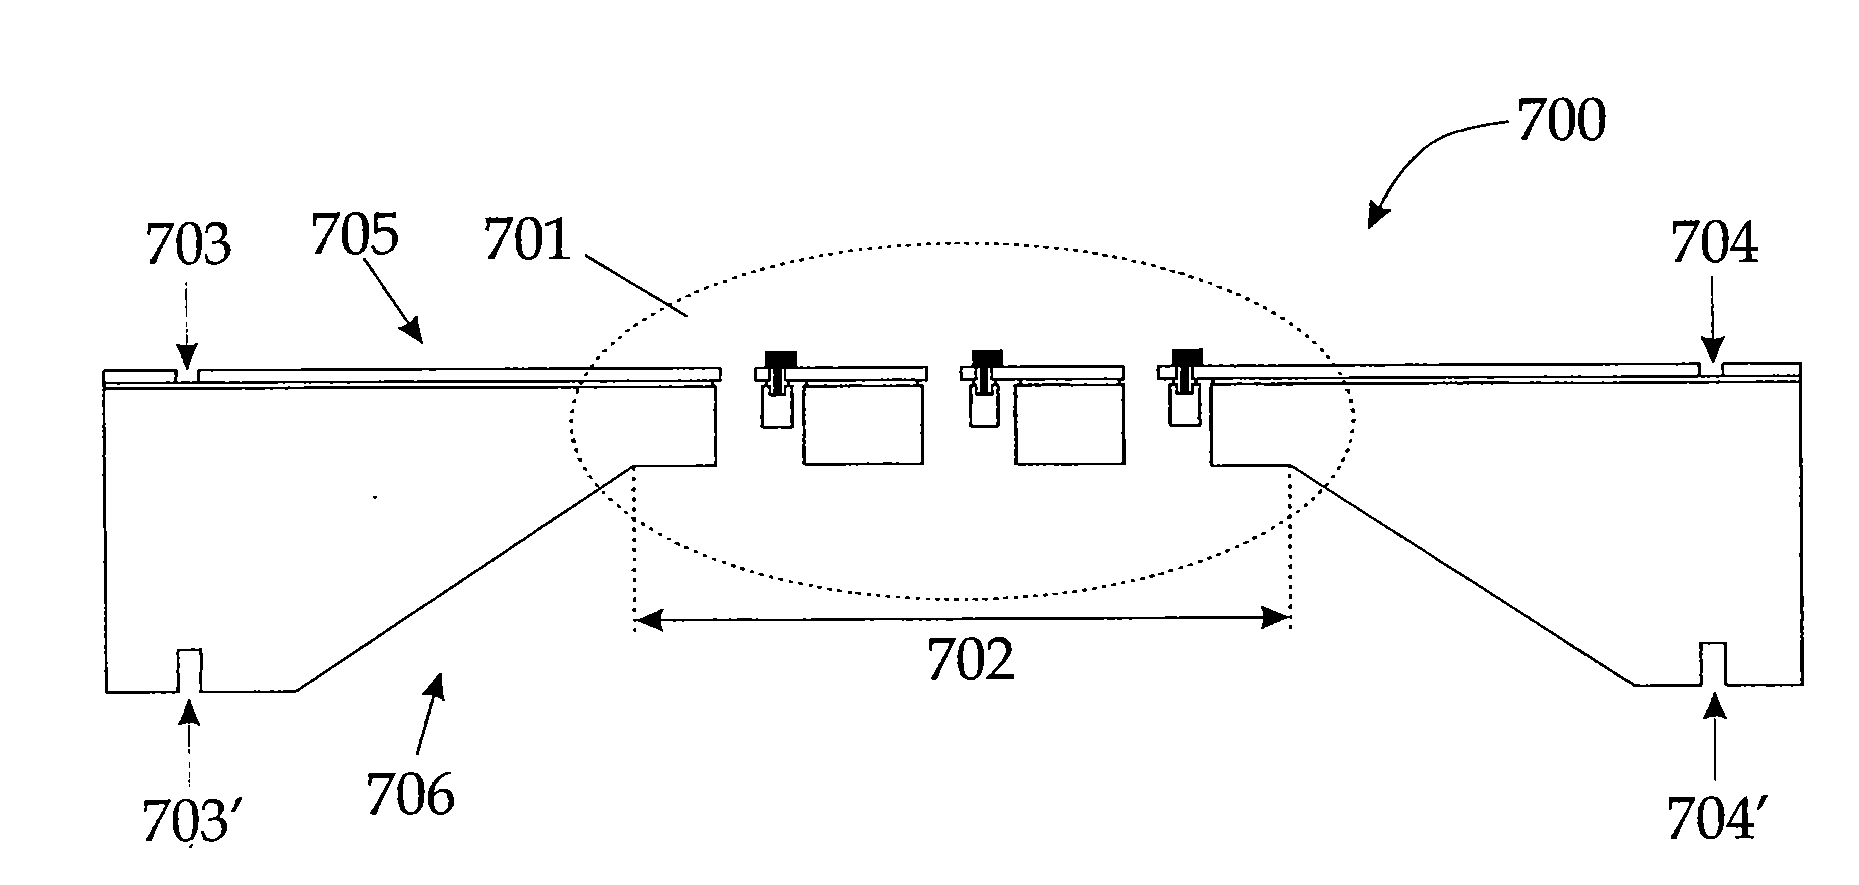 Multi-beam deflector array device for maskless particle-beam processing